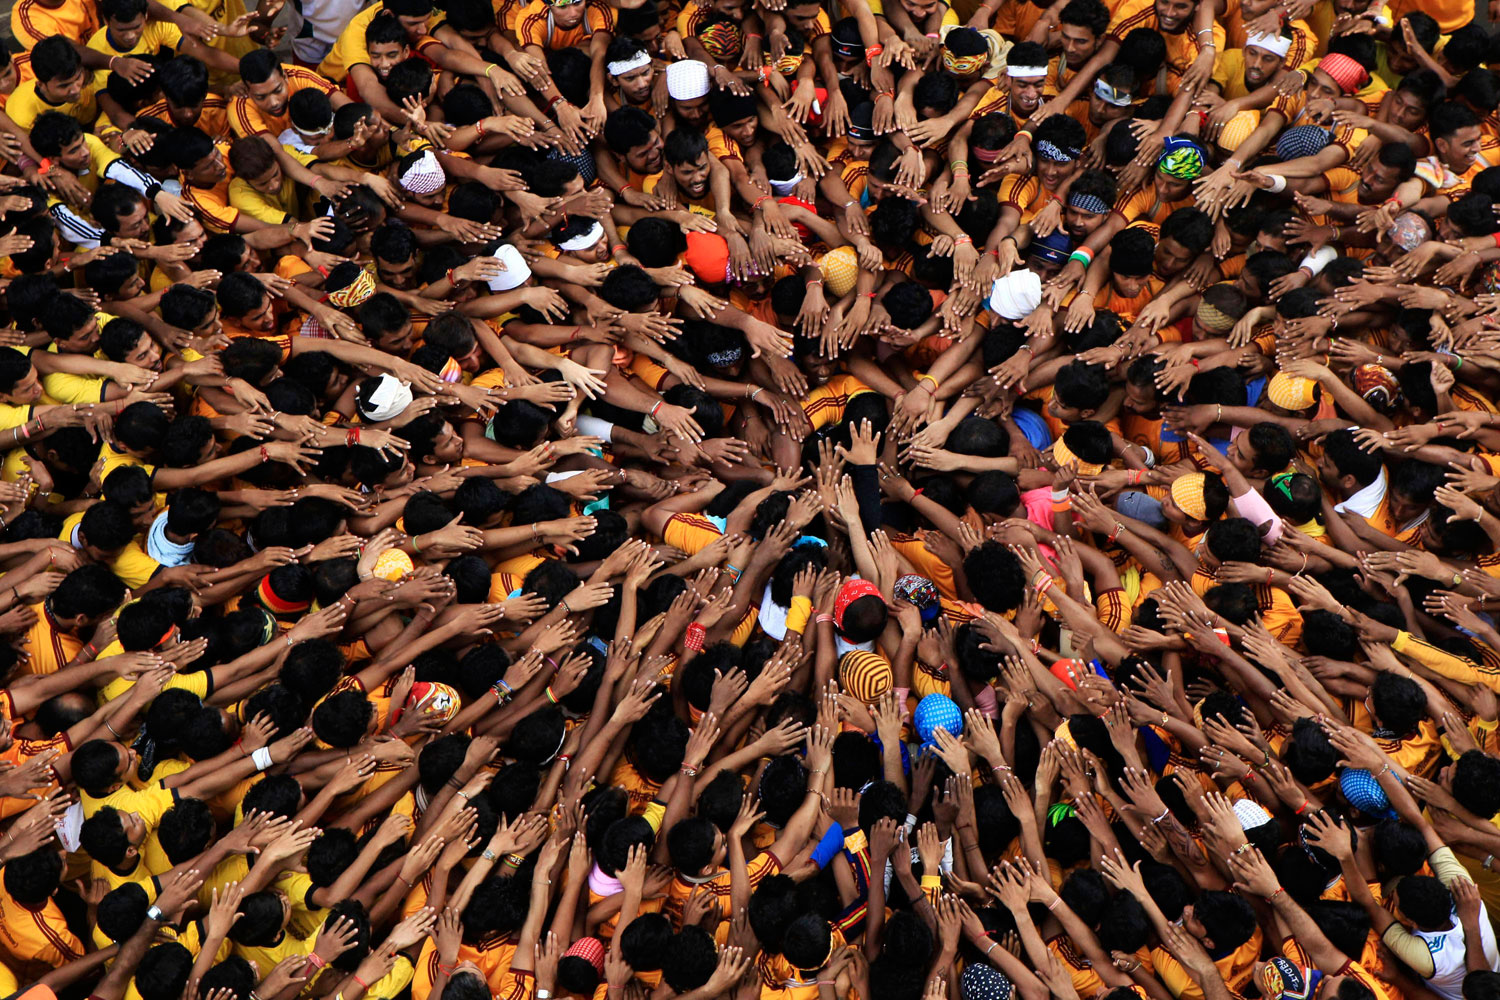 August 22, 2011. Young Indians make a human pyramid in Mumbai in an attempt to reach and break an earthen pot filled with yogurt as they celebrate Janmashtami, which commemorates the birth of the Hindu god Krishna.